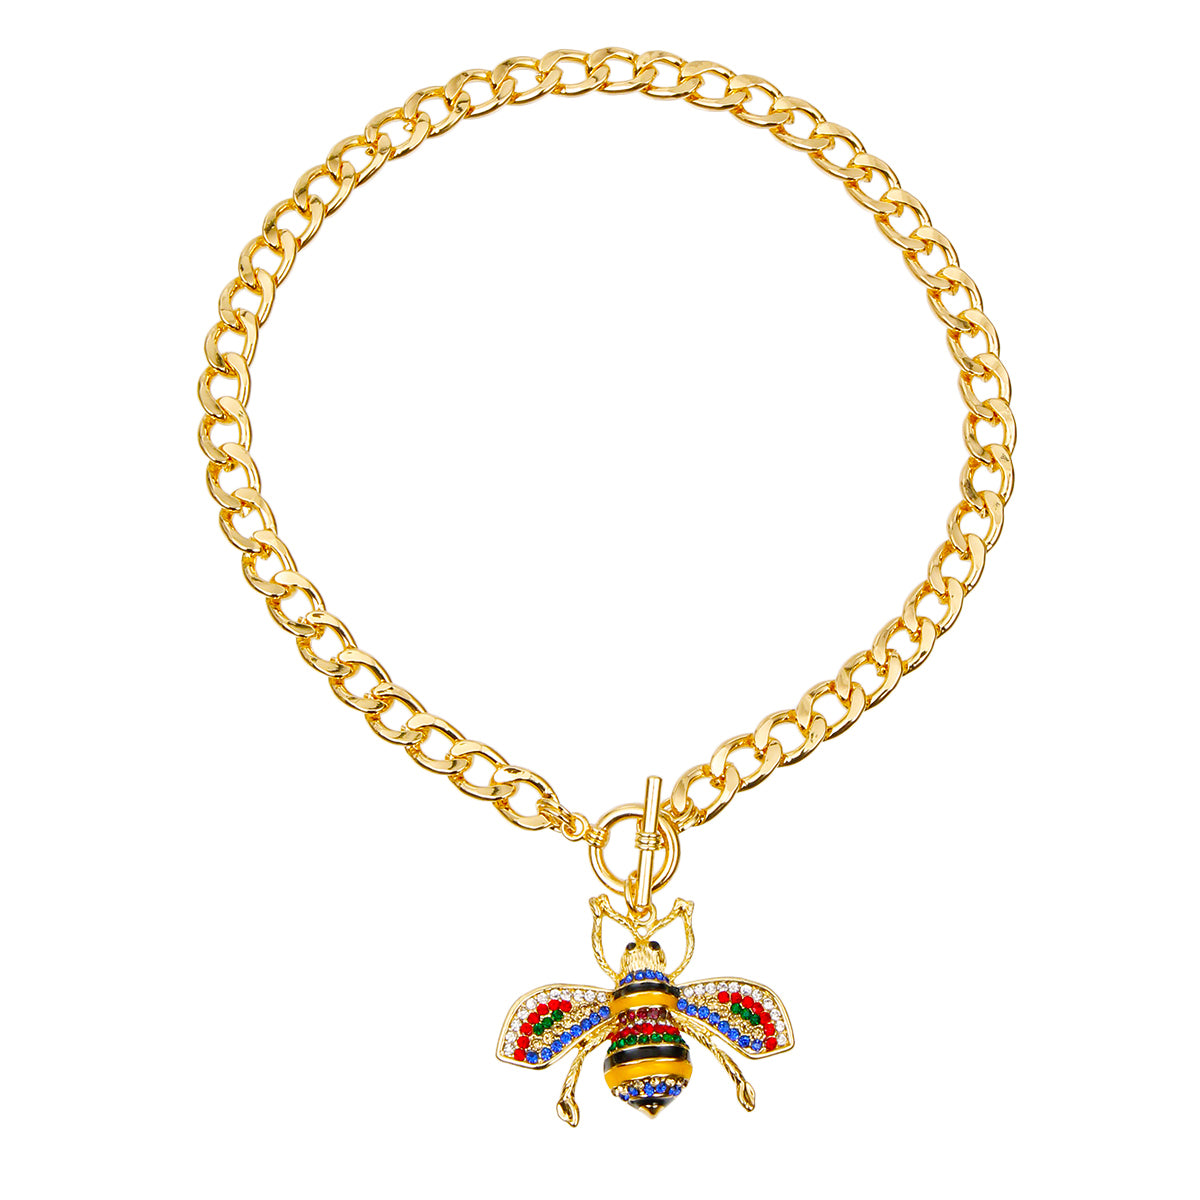 Phenomenal Queen bee necklace